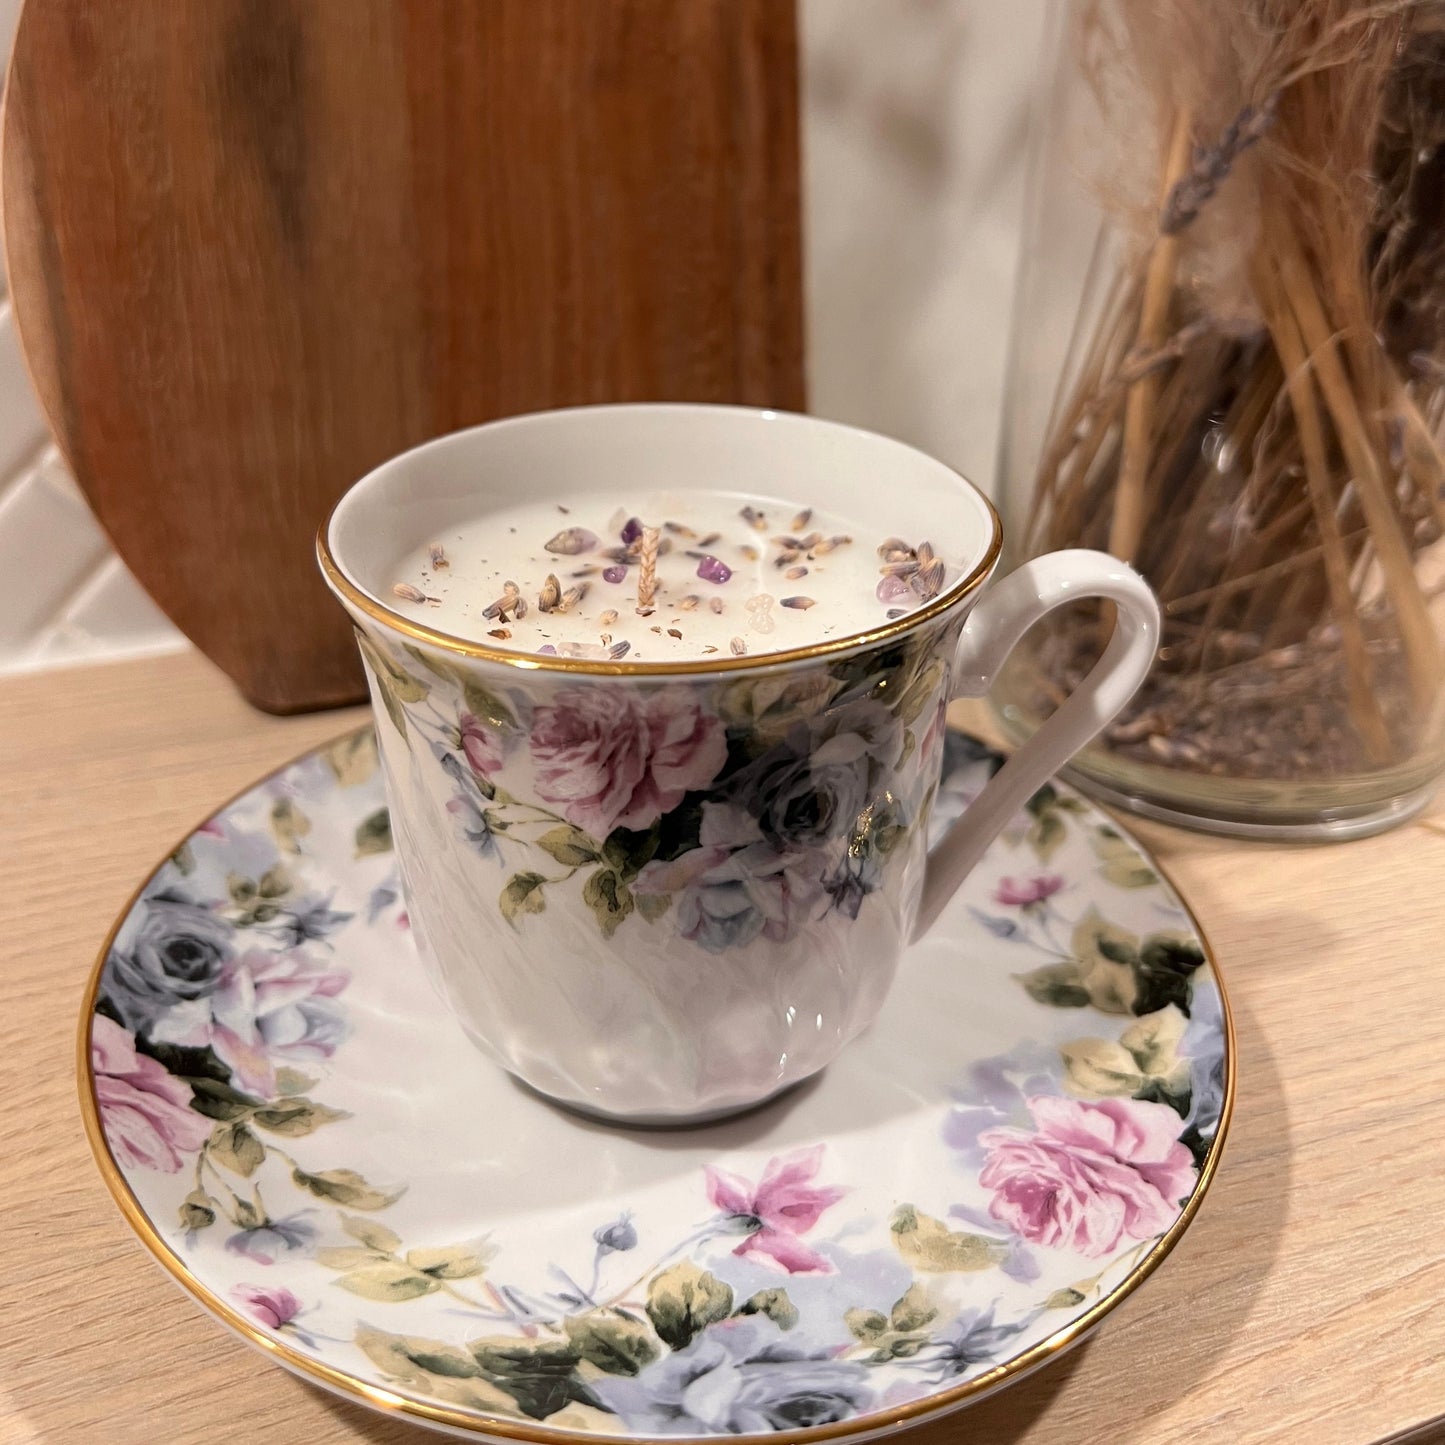 Vintage Tea Cup Candle with Floral Topper